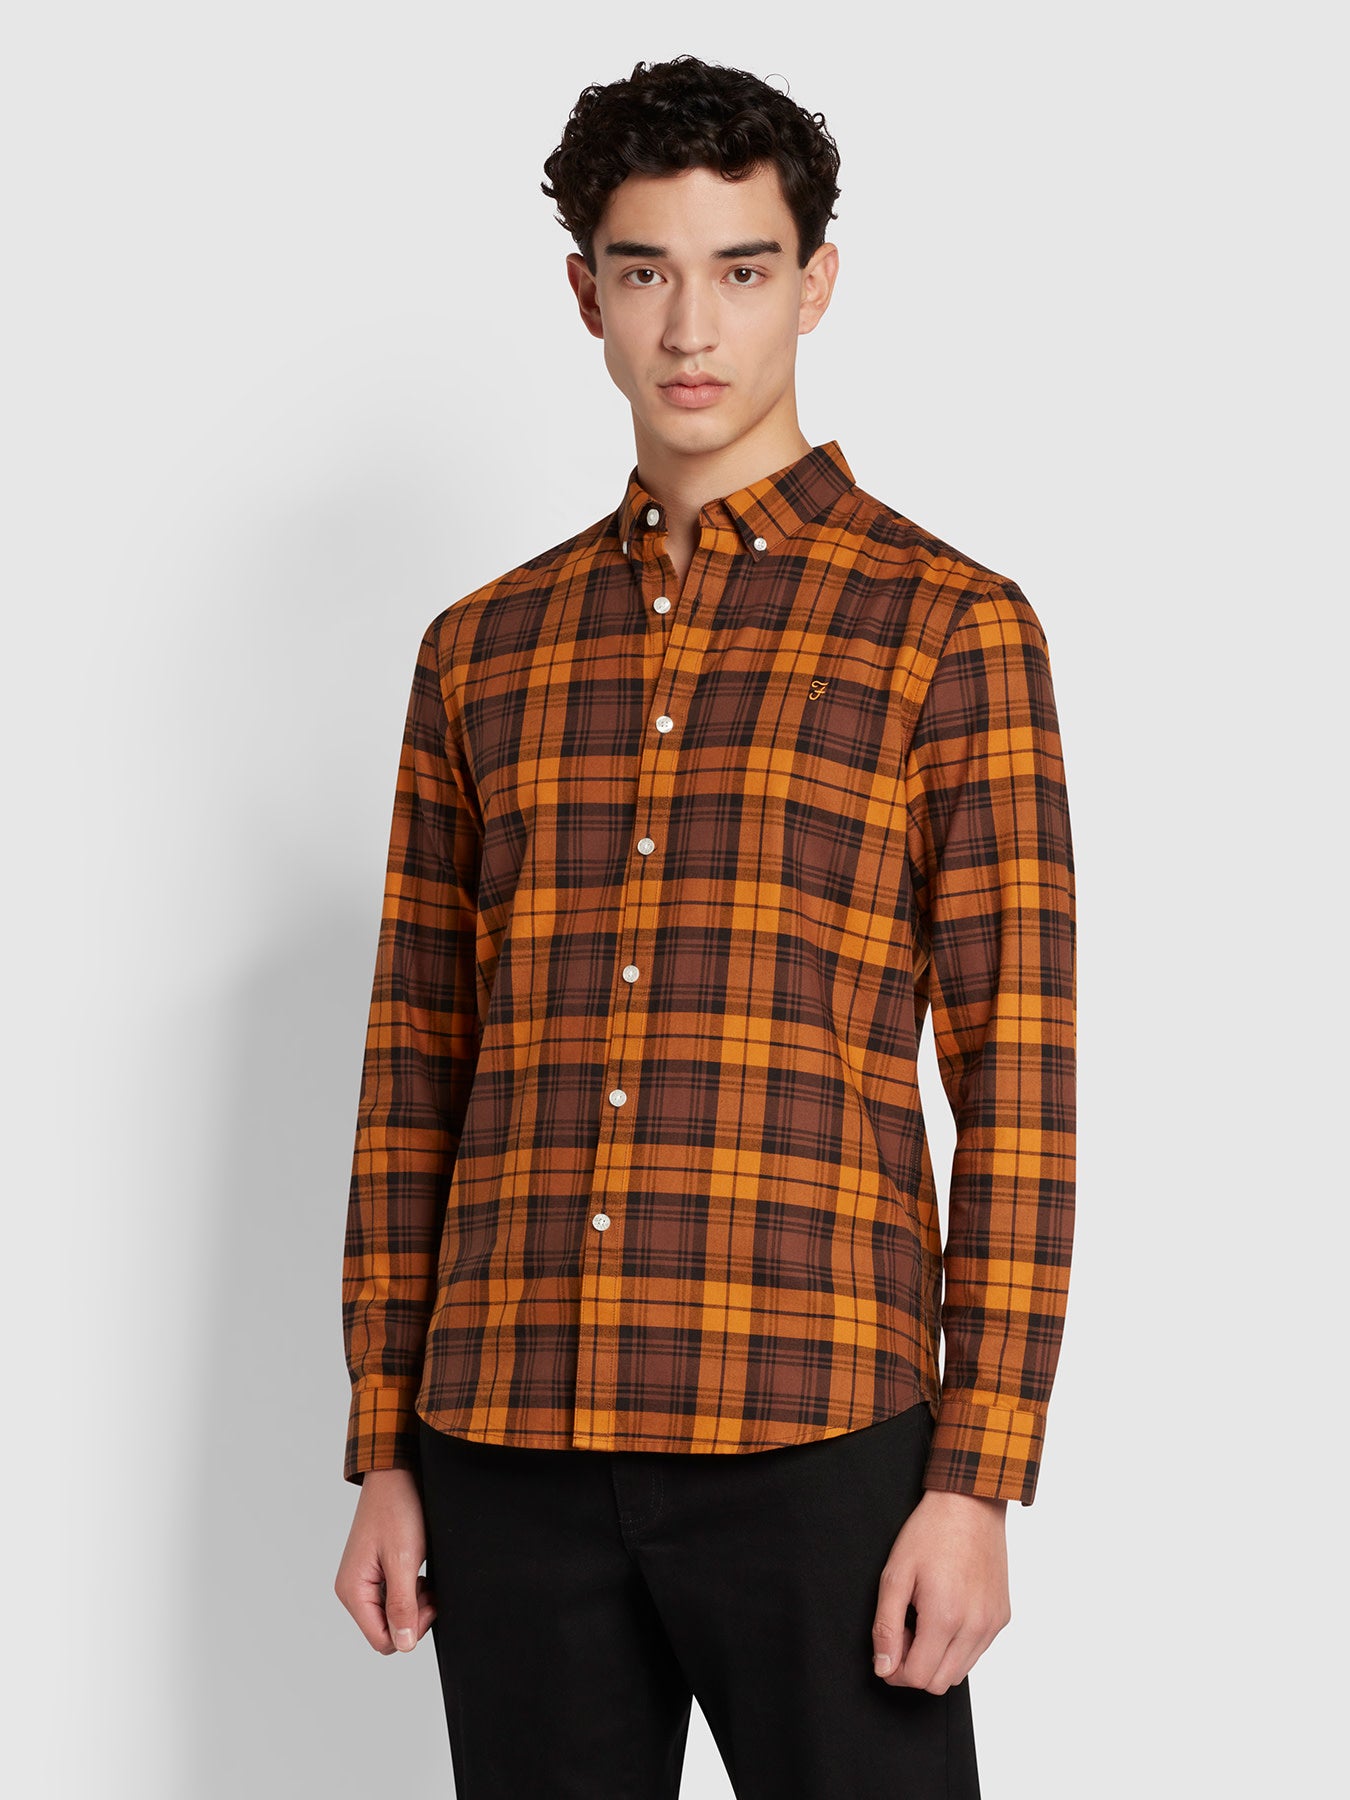 View Brewer Slim Fit Long Sleeve Check Shirt In Mocha Brown information